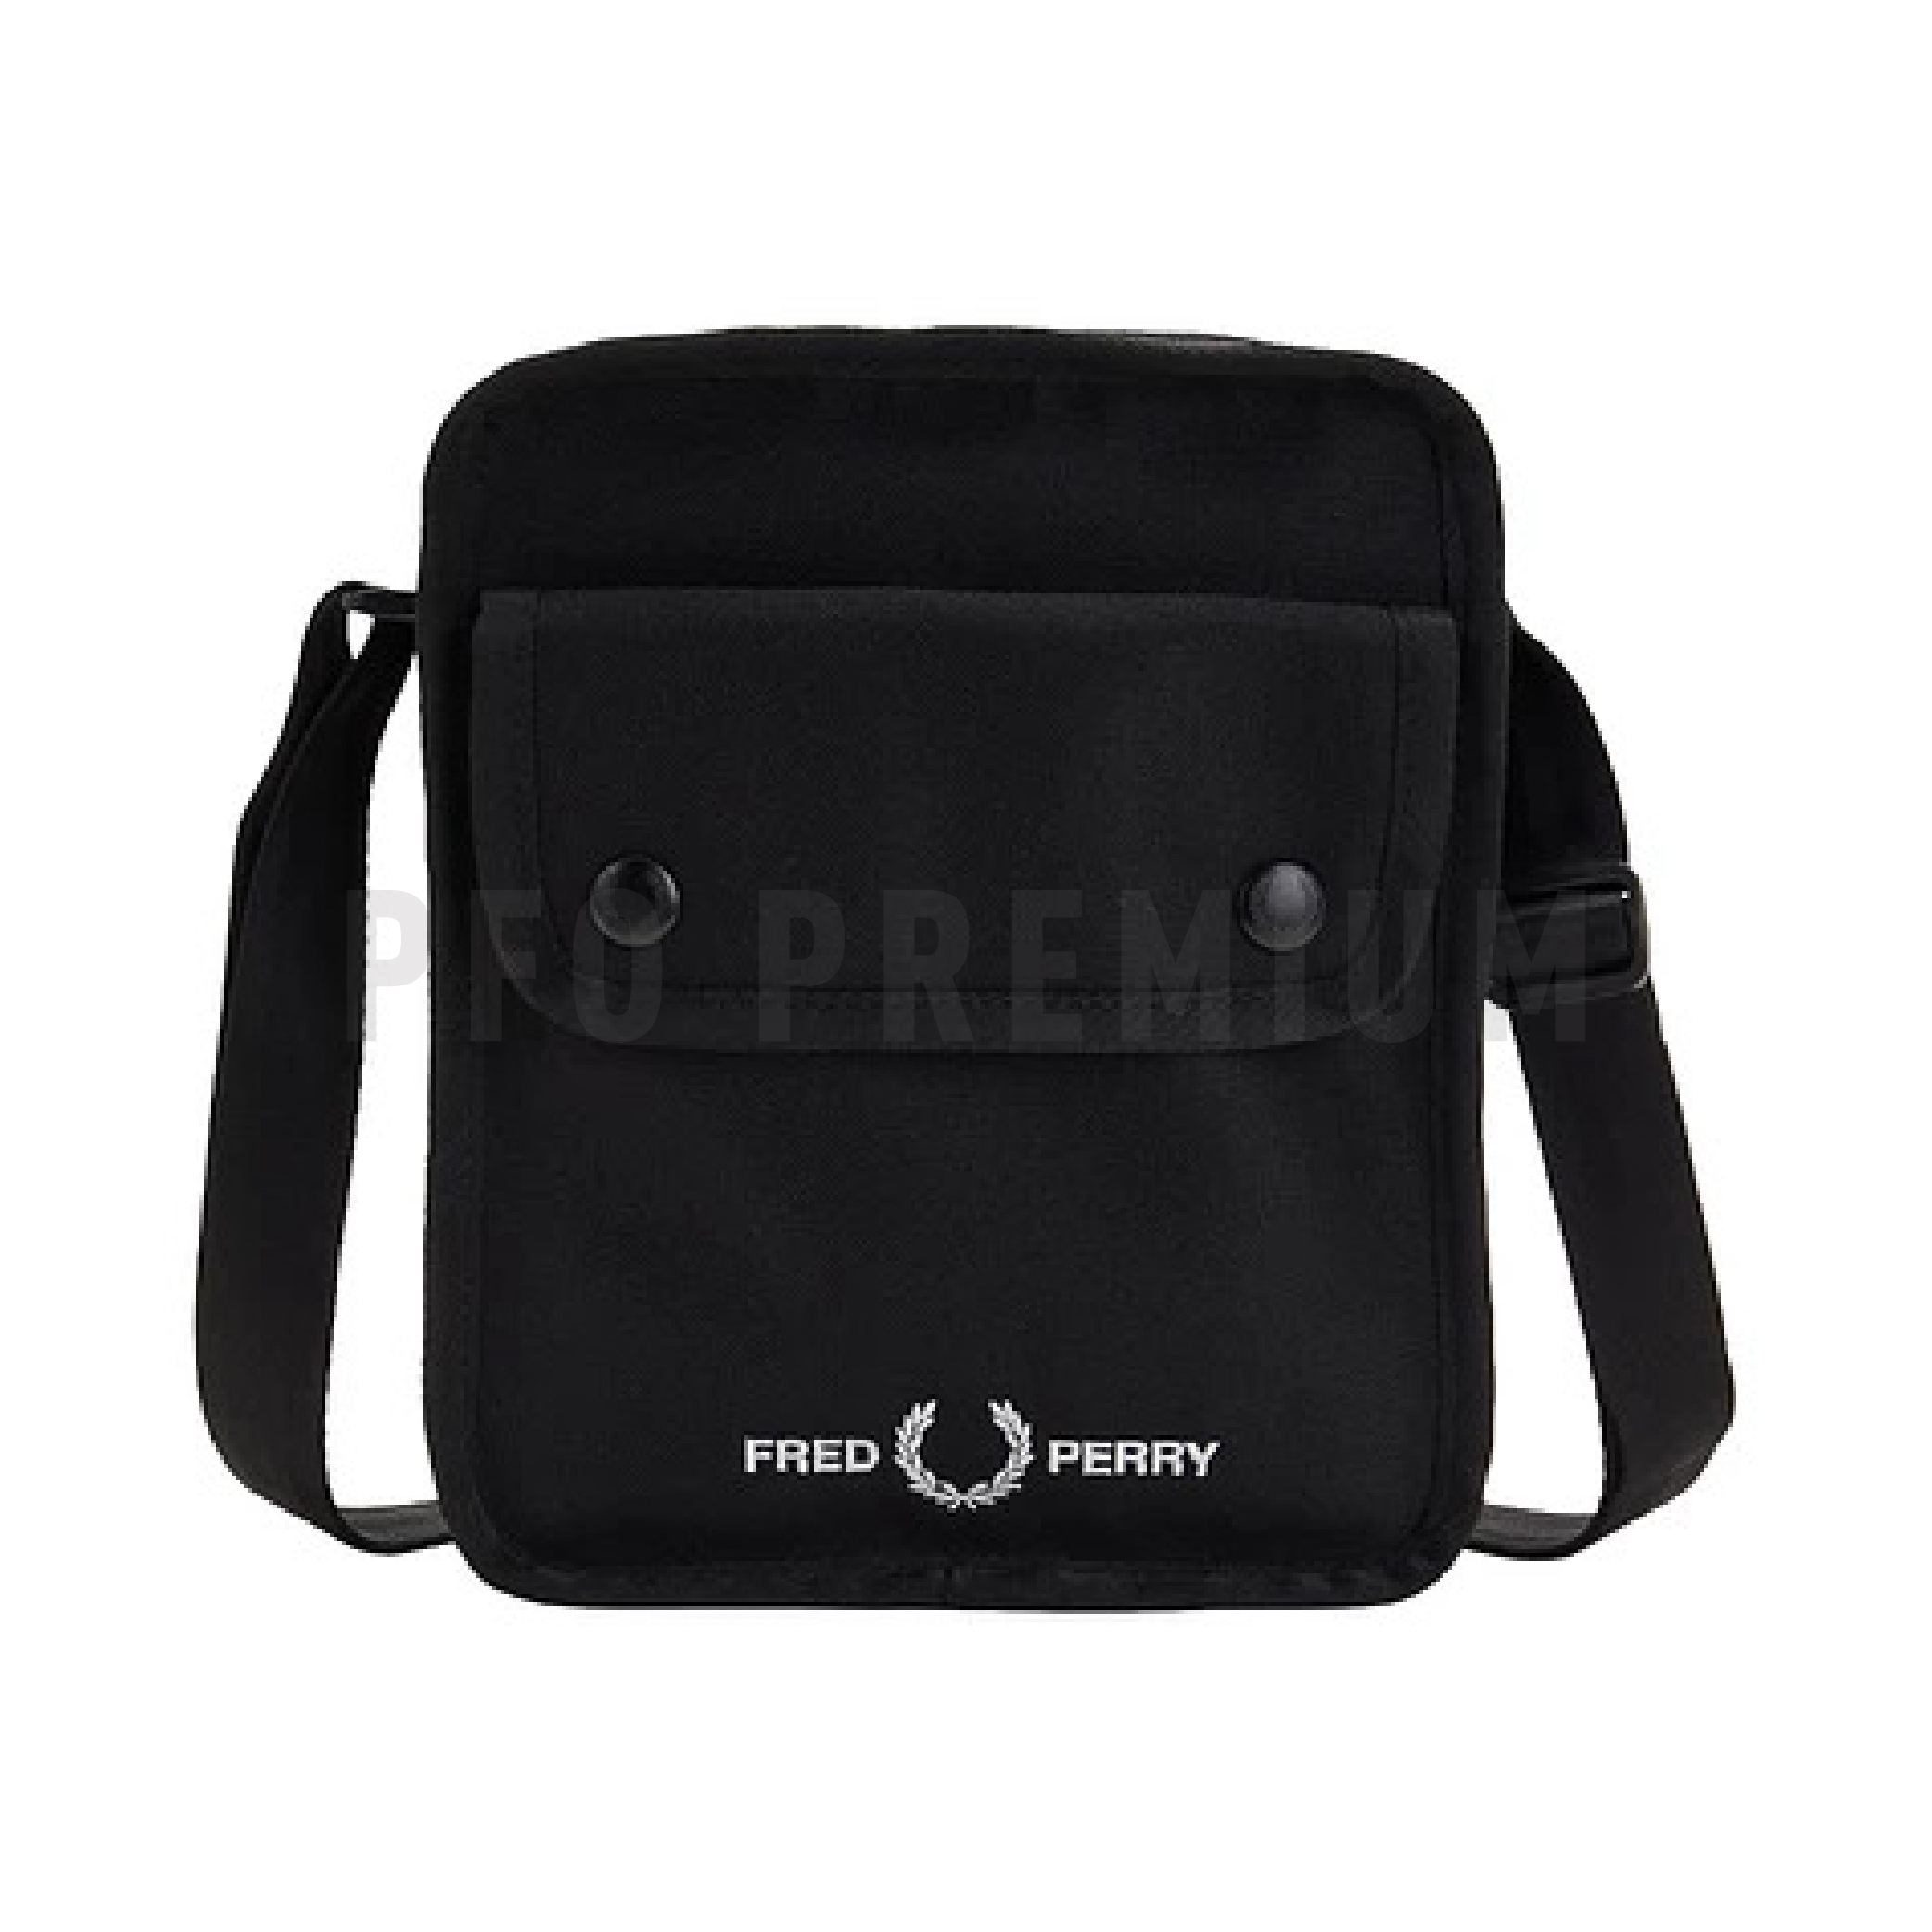 31.01.24 Fred Perry Bag-01